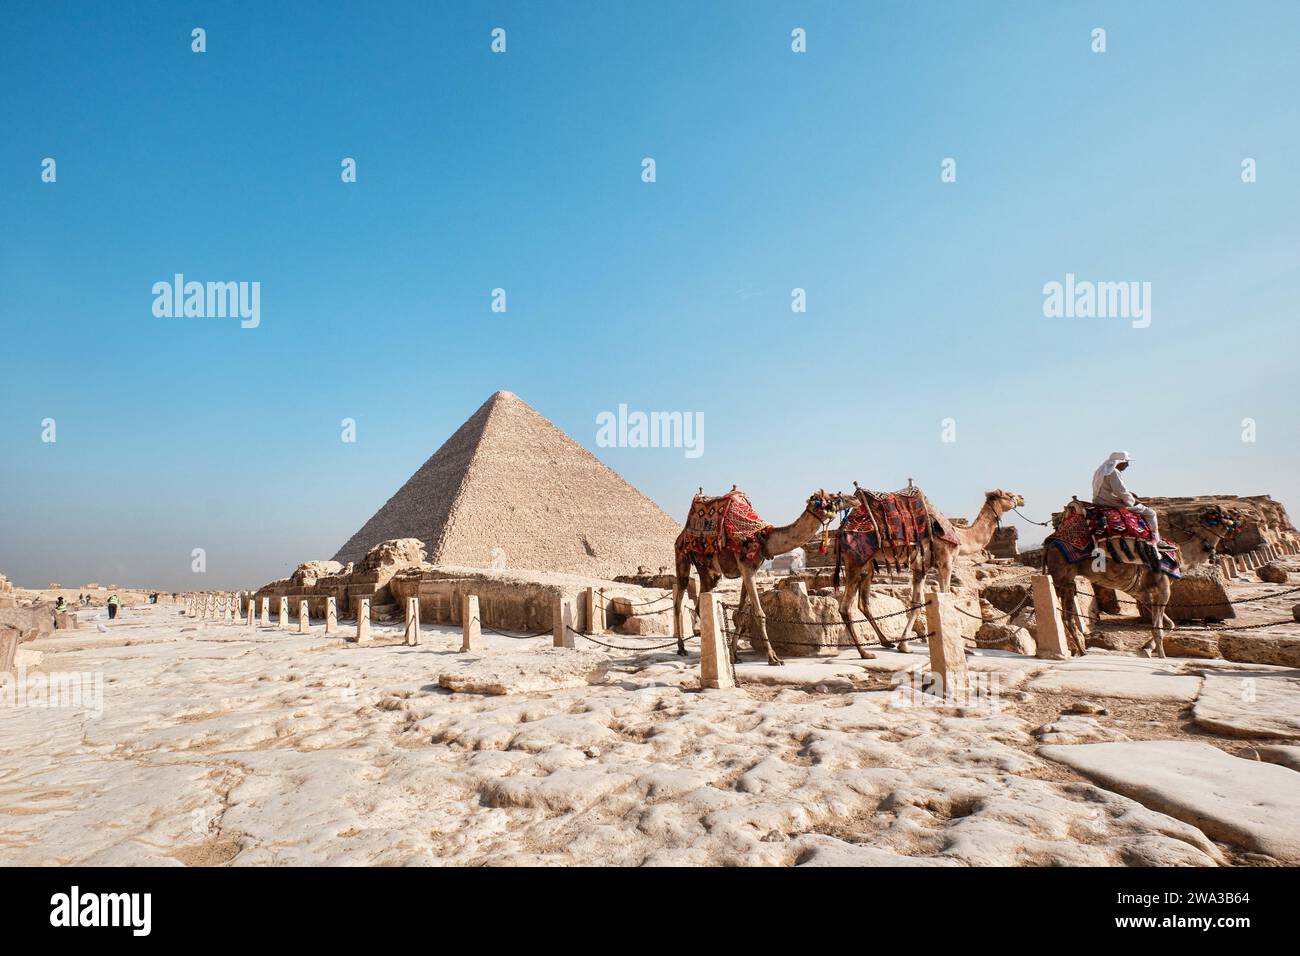 Giza, Egypt - December 24 2023: The Great Pyramid Khufu (Pyramid of Cheops) is the oldest and largest of the three pyramids in the Giza and camels Stock Photo